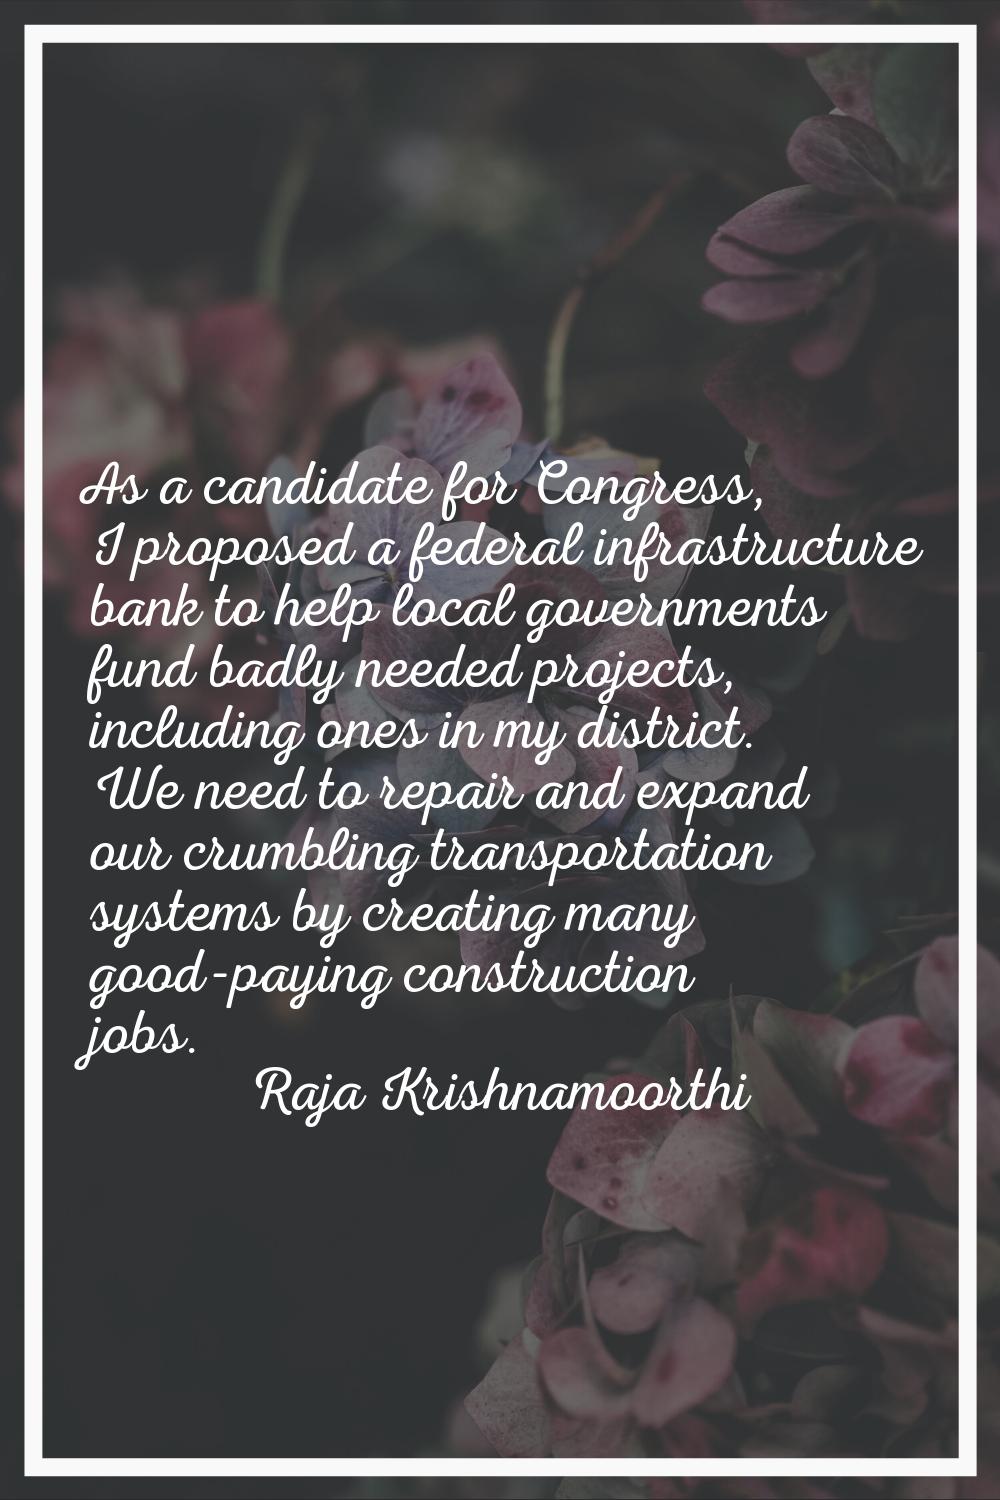 As a candidate for Congress, I proposed a federal infrastructure bank to help local governments fun